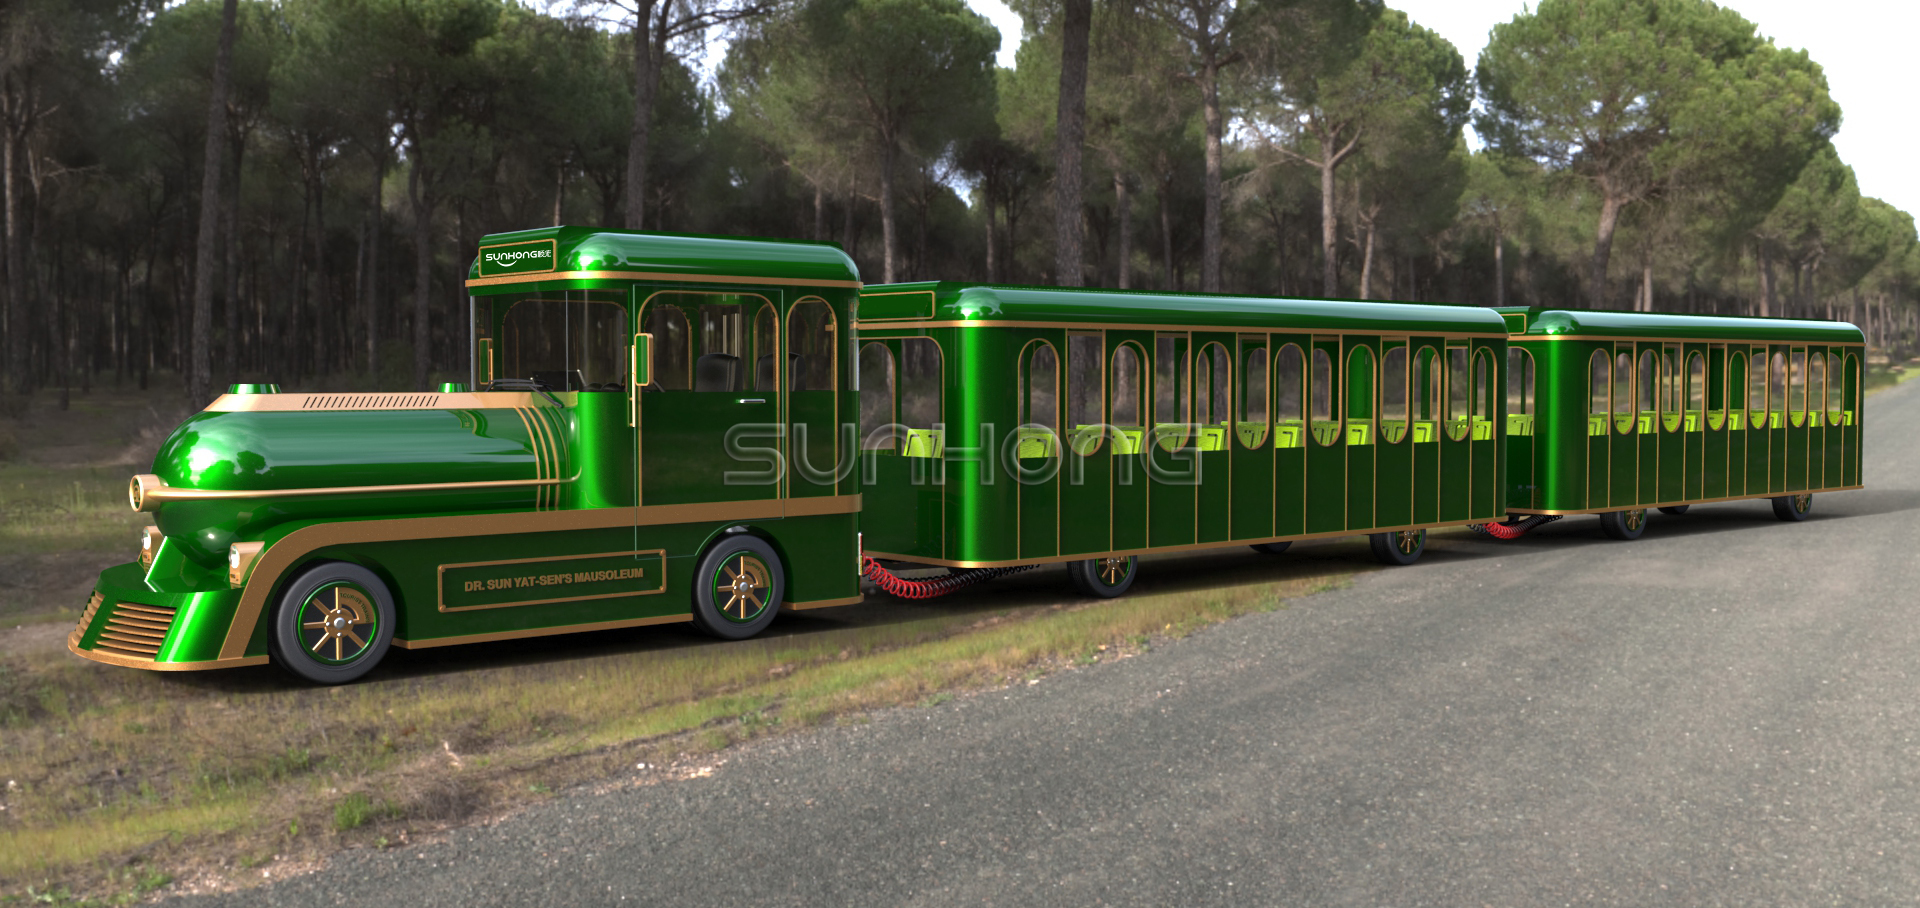 Exalted Sightseeing Diesel Fuel Lithium Battery Trackless Train Manufacturer 72 Seats 